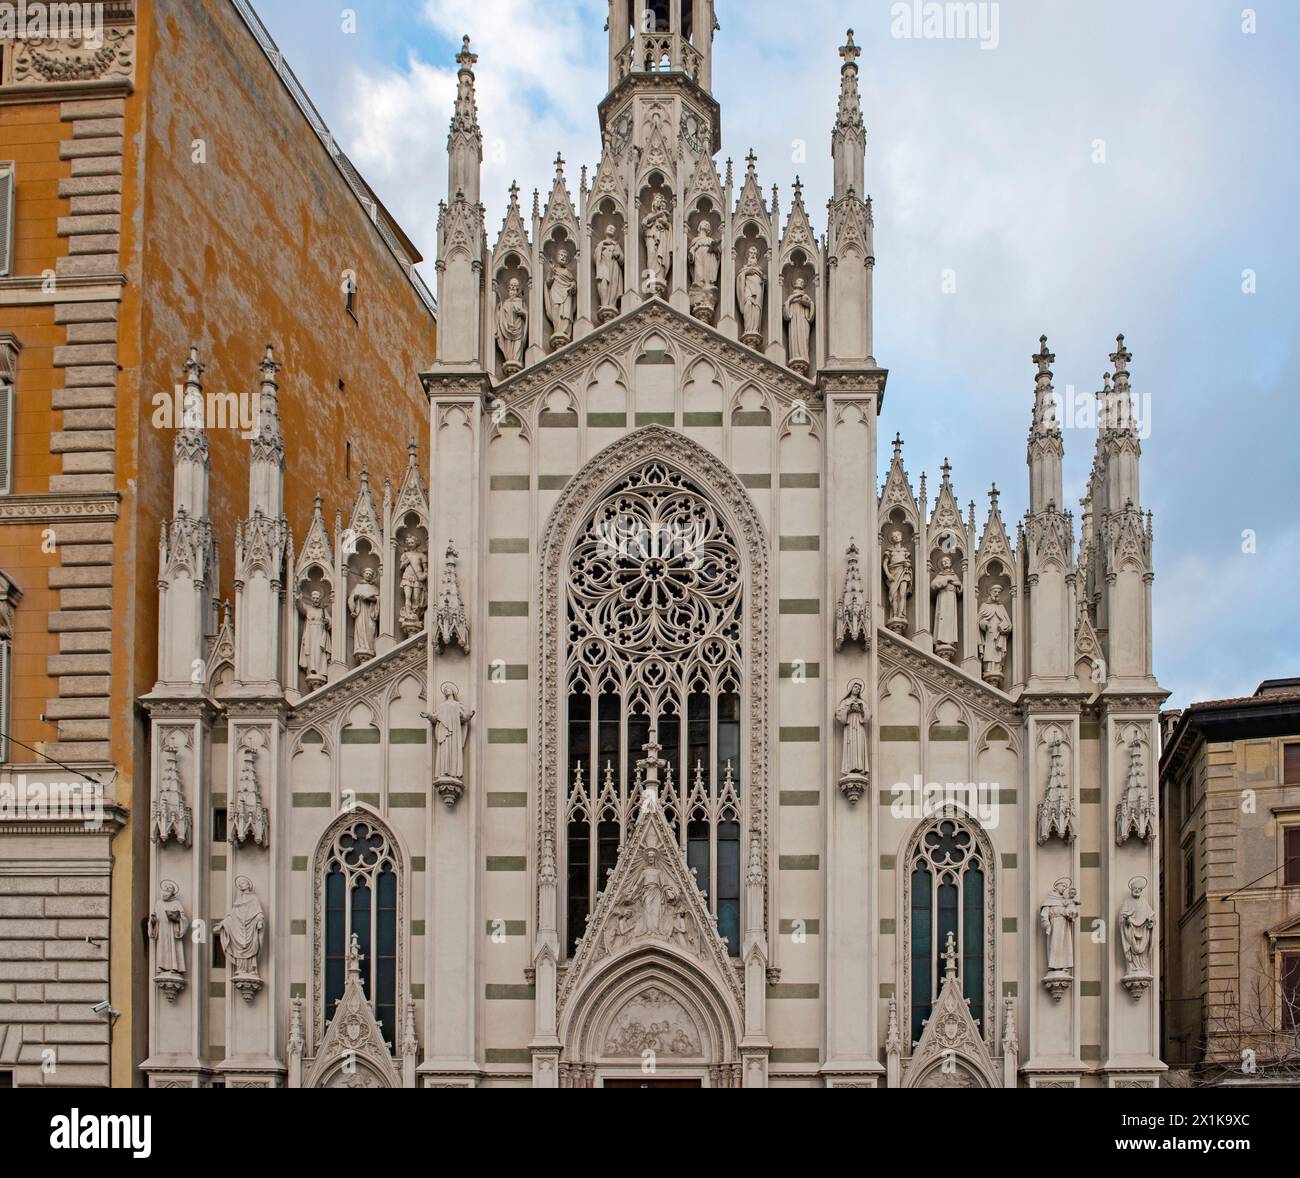 Closeup detail showing ornate exterior facade of old catholic church in rome Italy with statues and spires Stock Photo